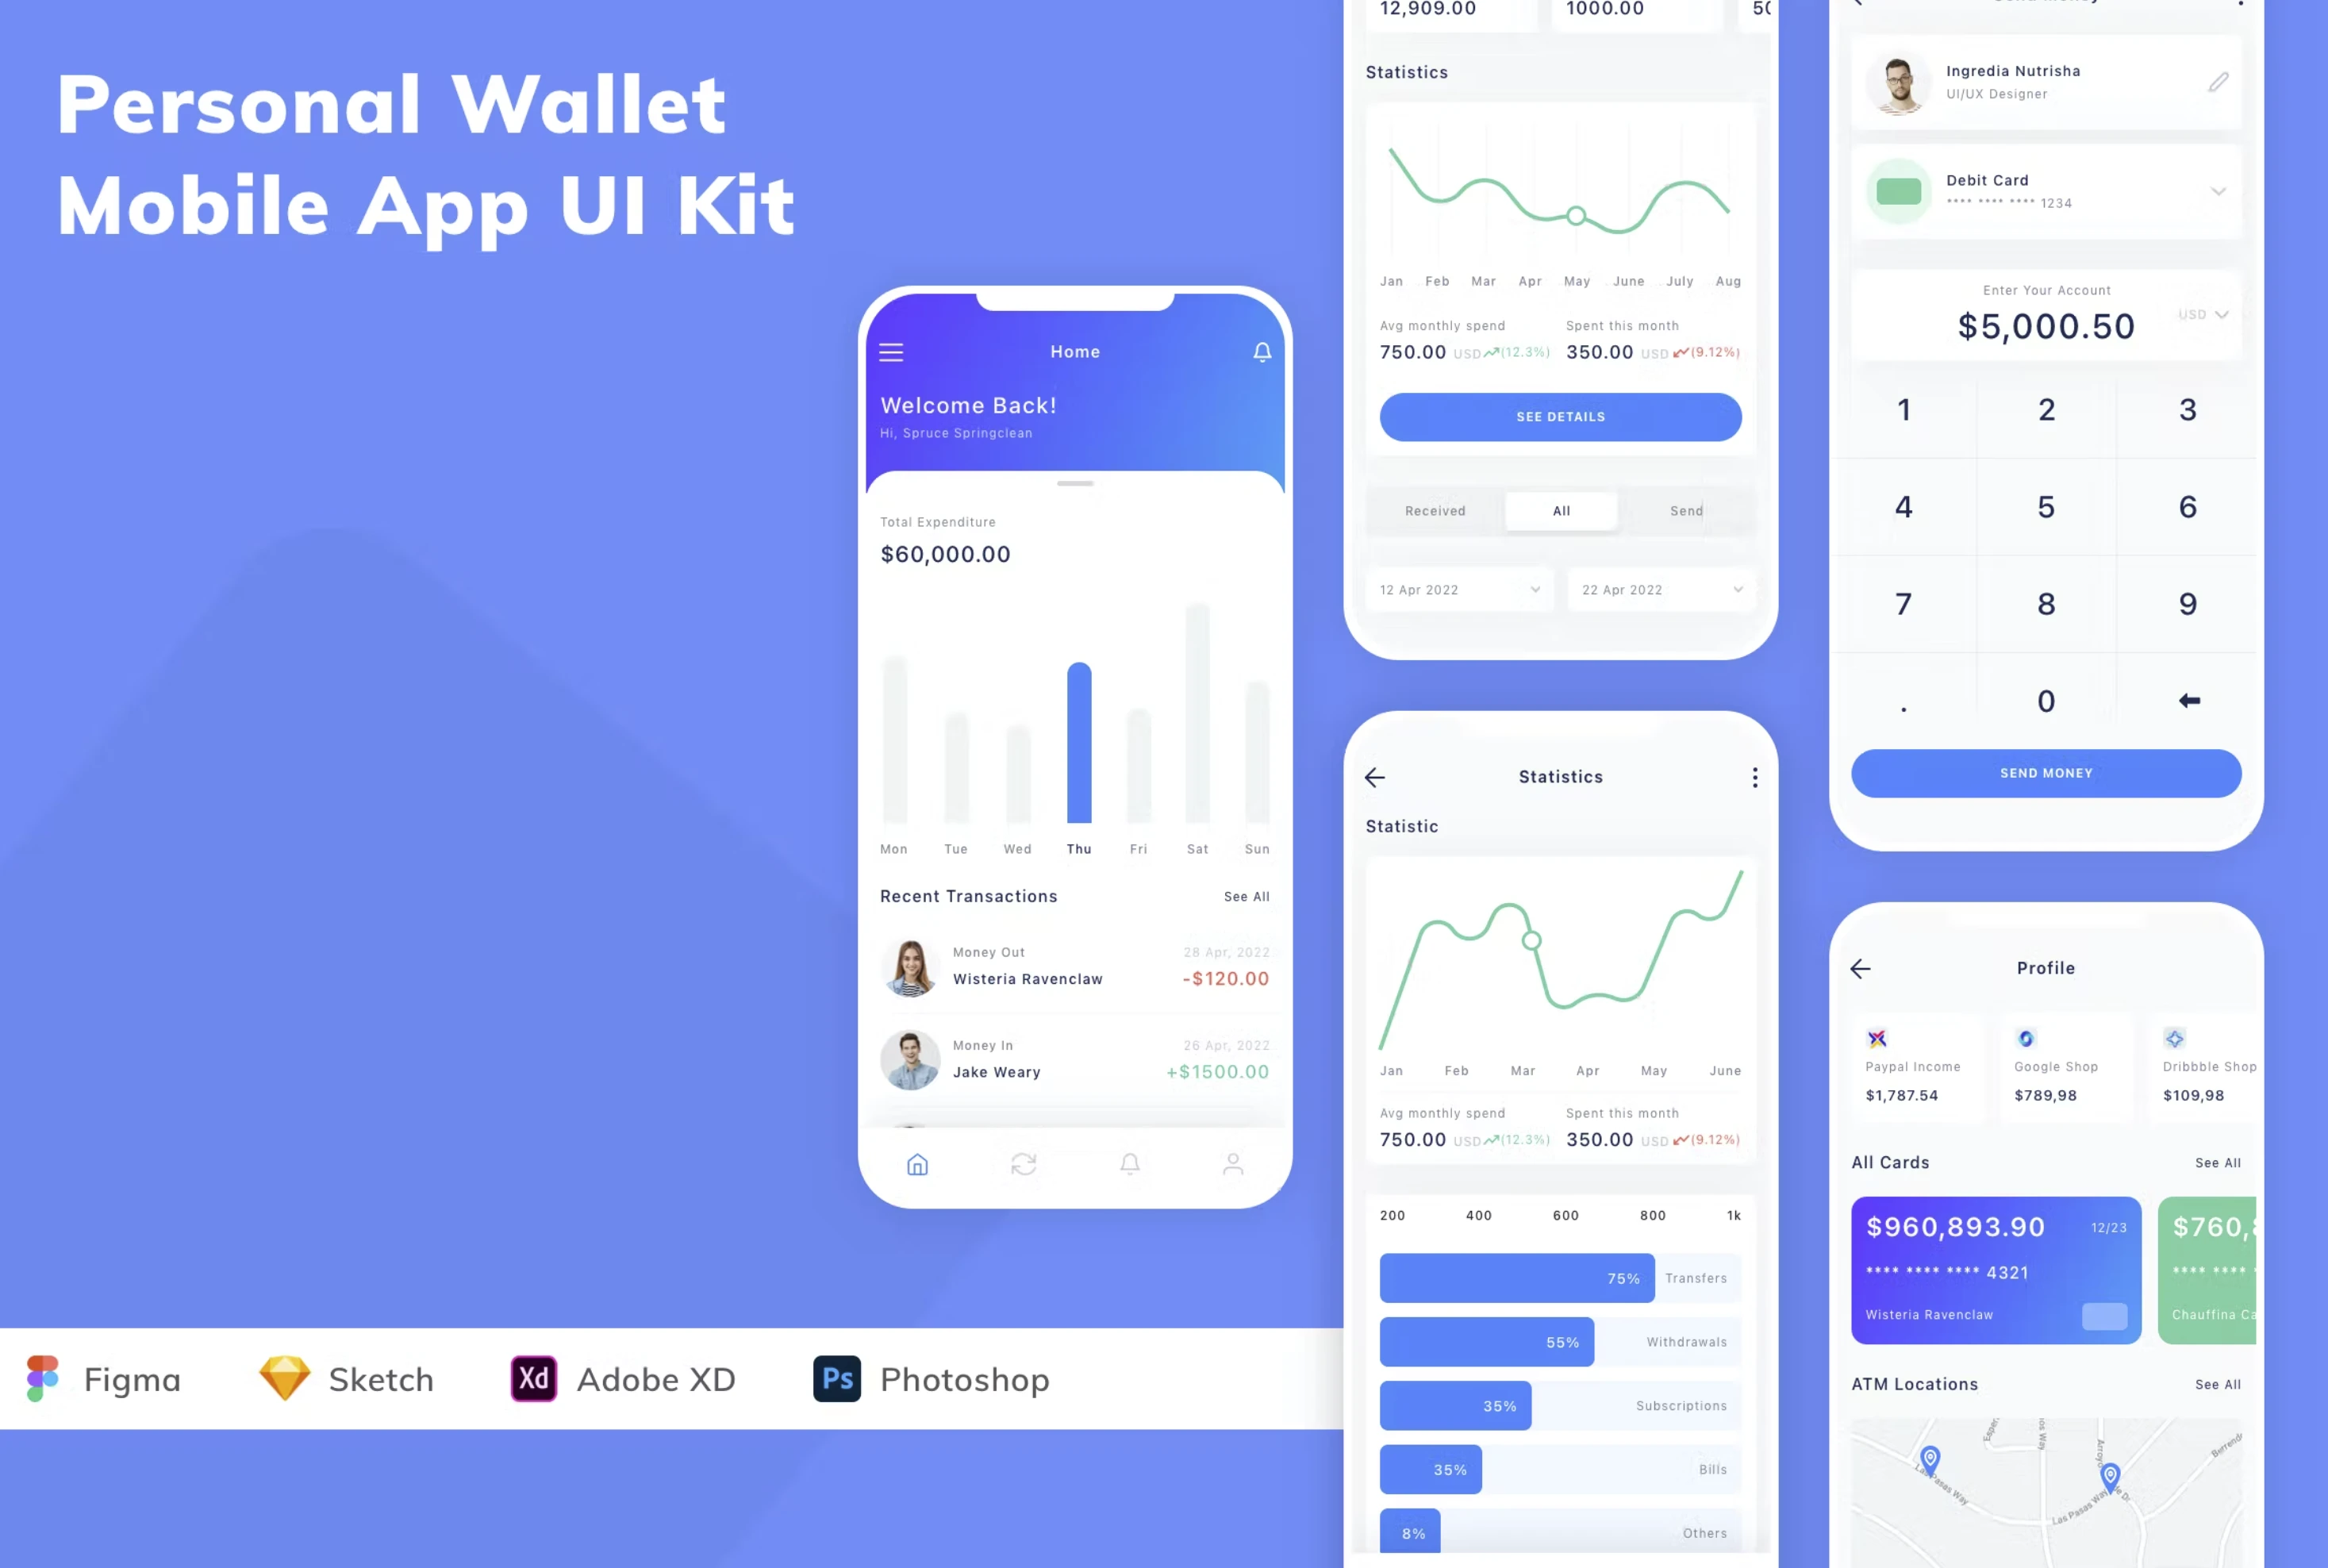 Figma UI kit - Personal Wallet Mobile App for Figma and Adobe XD